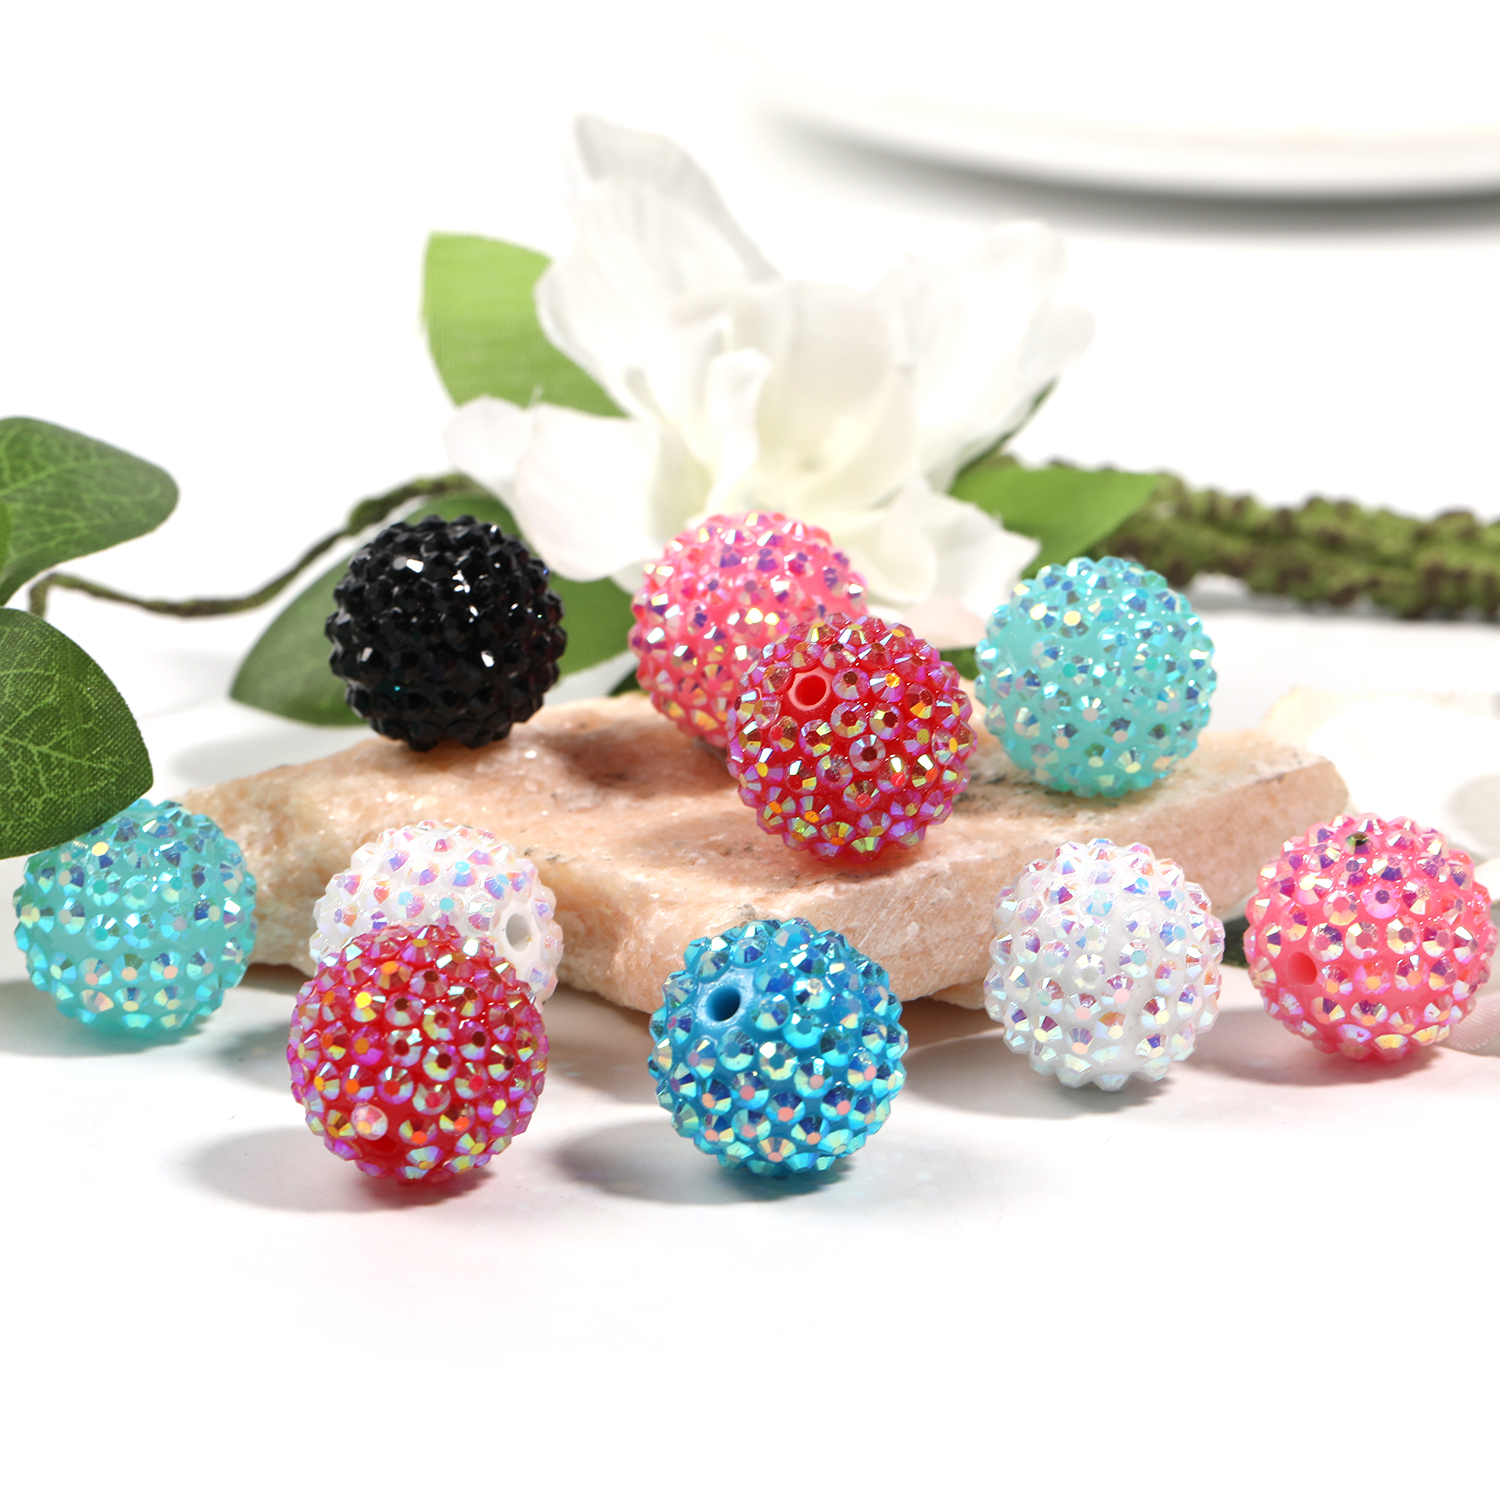 【B129】50pcs Colorful Rhinestone Beads Round Spacer Beads for Jewelry Bracelet Necklace Pen Bag -JPM